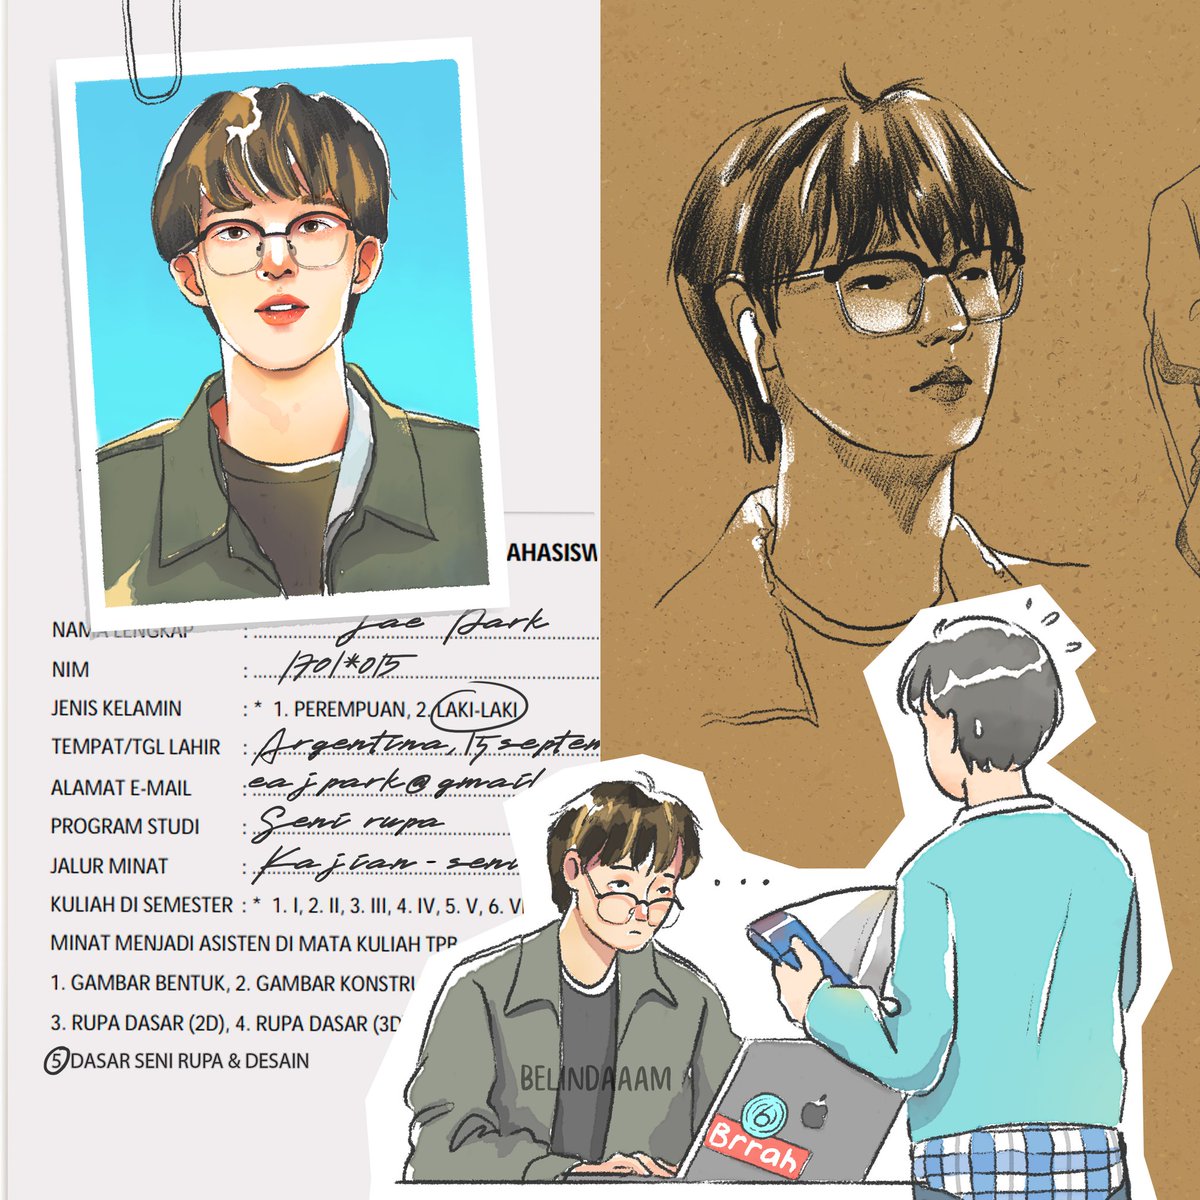 My friend made a fanart series about  #DAY6 members as Art students + Student assistants!!!Here is Jae as a professor assistant for the Art Study class.Other members will be coming soon! You can check out her other amazing arts here: https://www.instagram.com/p/B-1FrLolqQ5/?igshid=y0vyyv7snrco